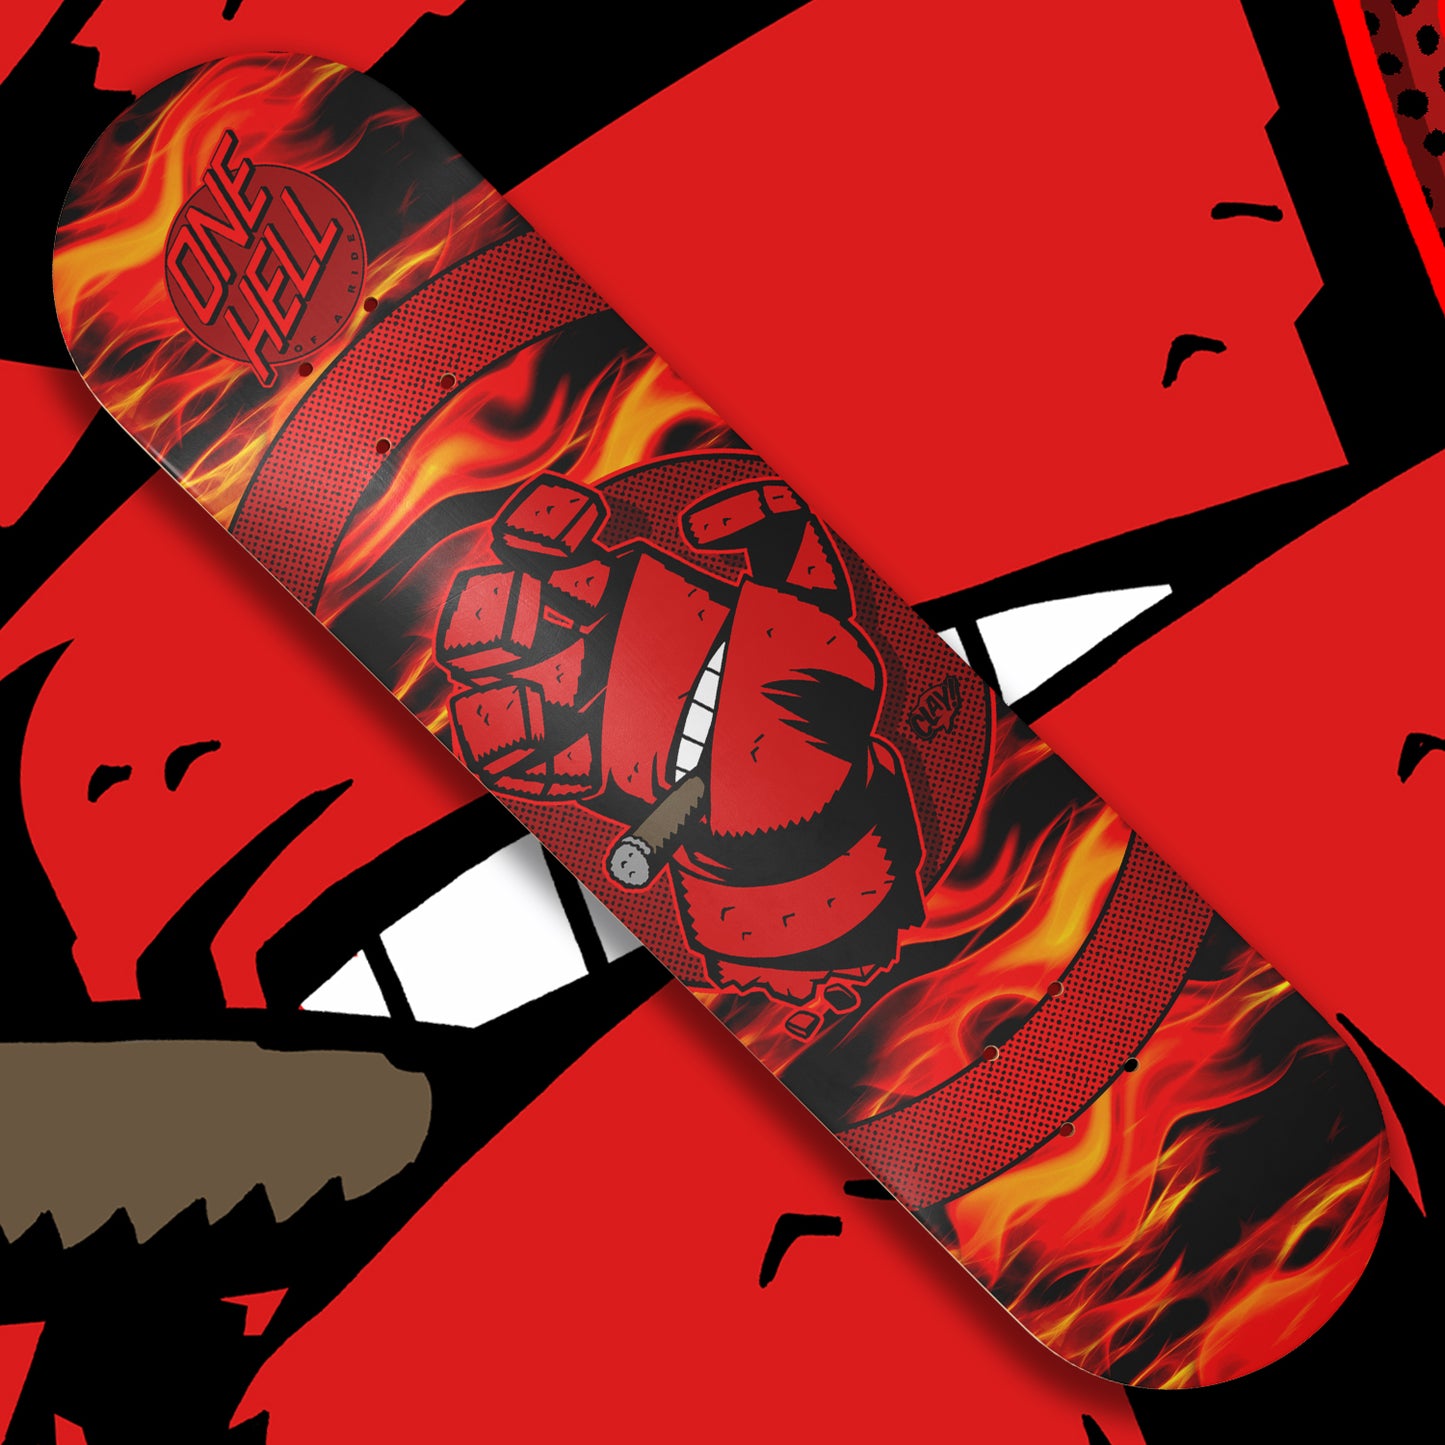 One Hell of a Ride skate deck